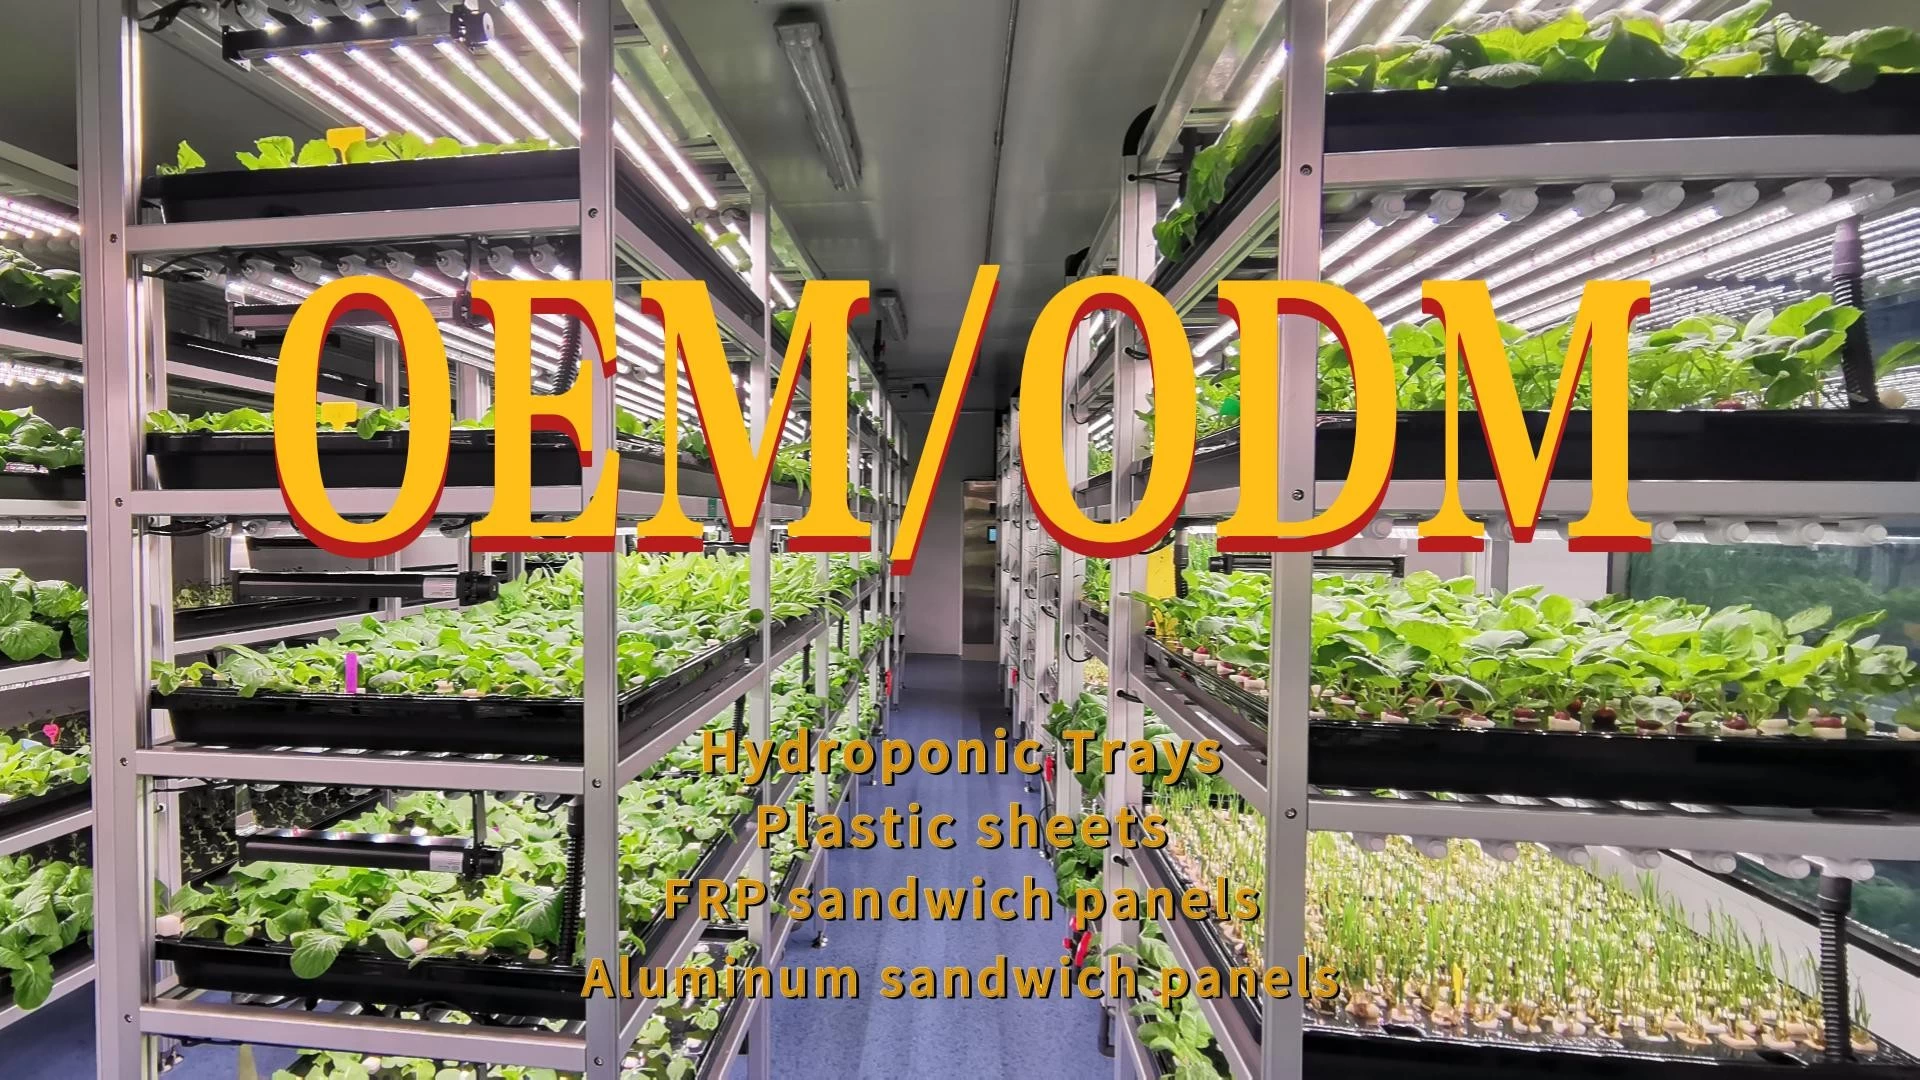 Professional manufacturer of Hydroponic trays and plastic panels